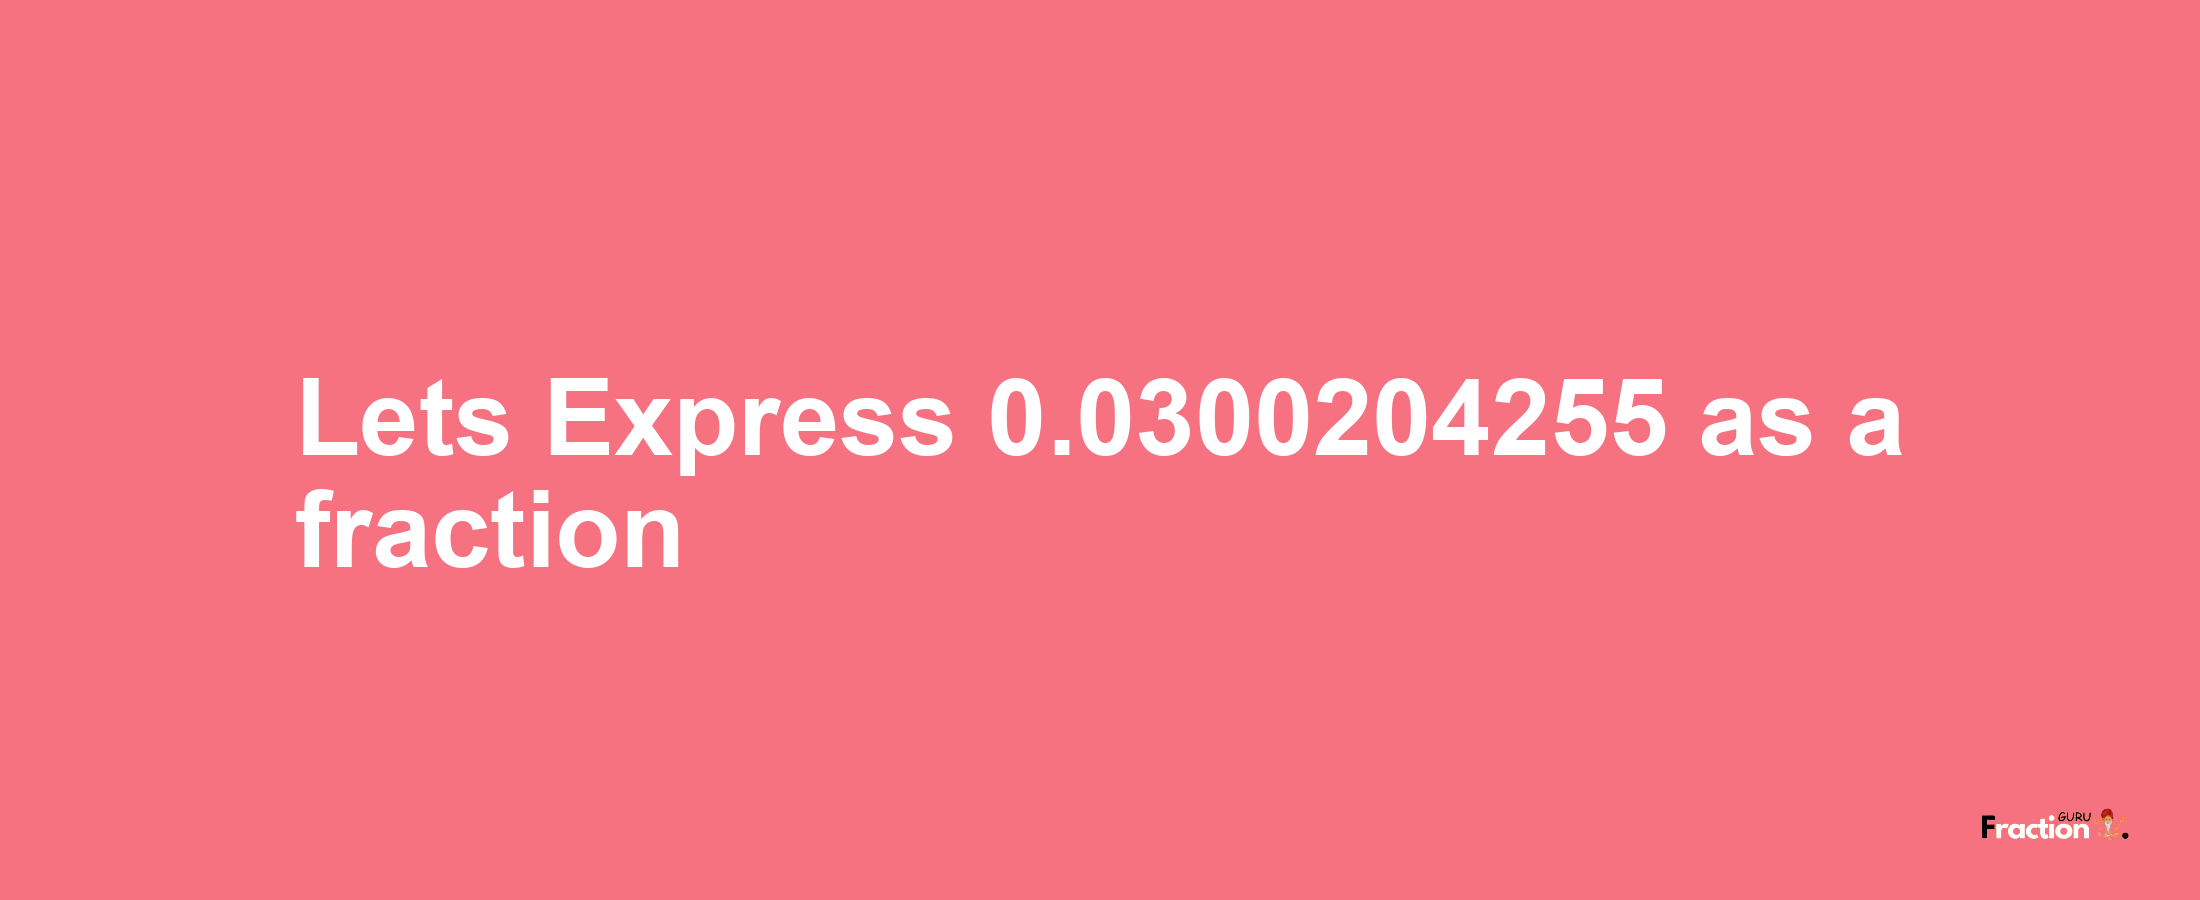 Lets Express 0.0300204255 as afraction